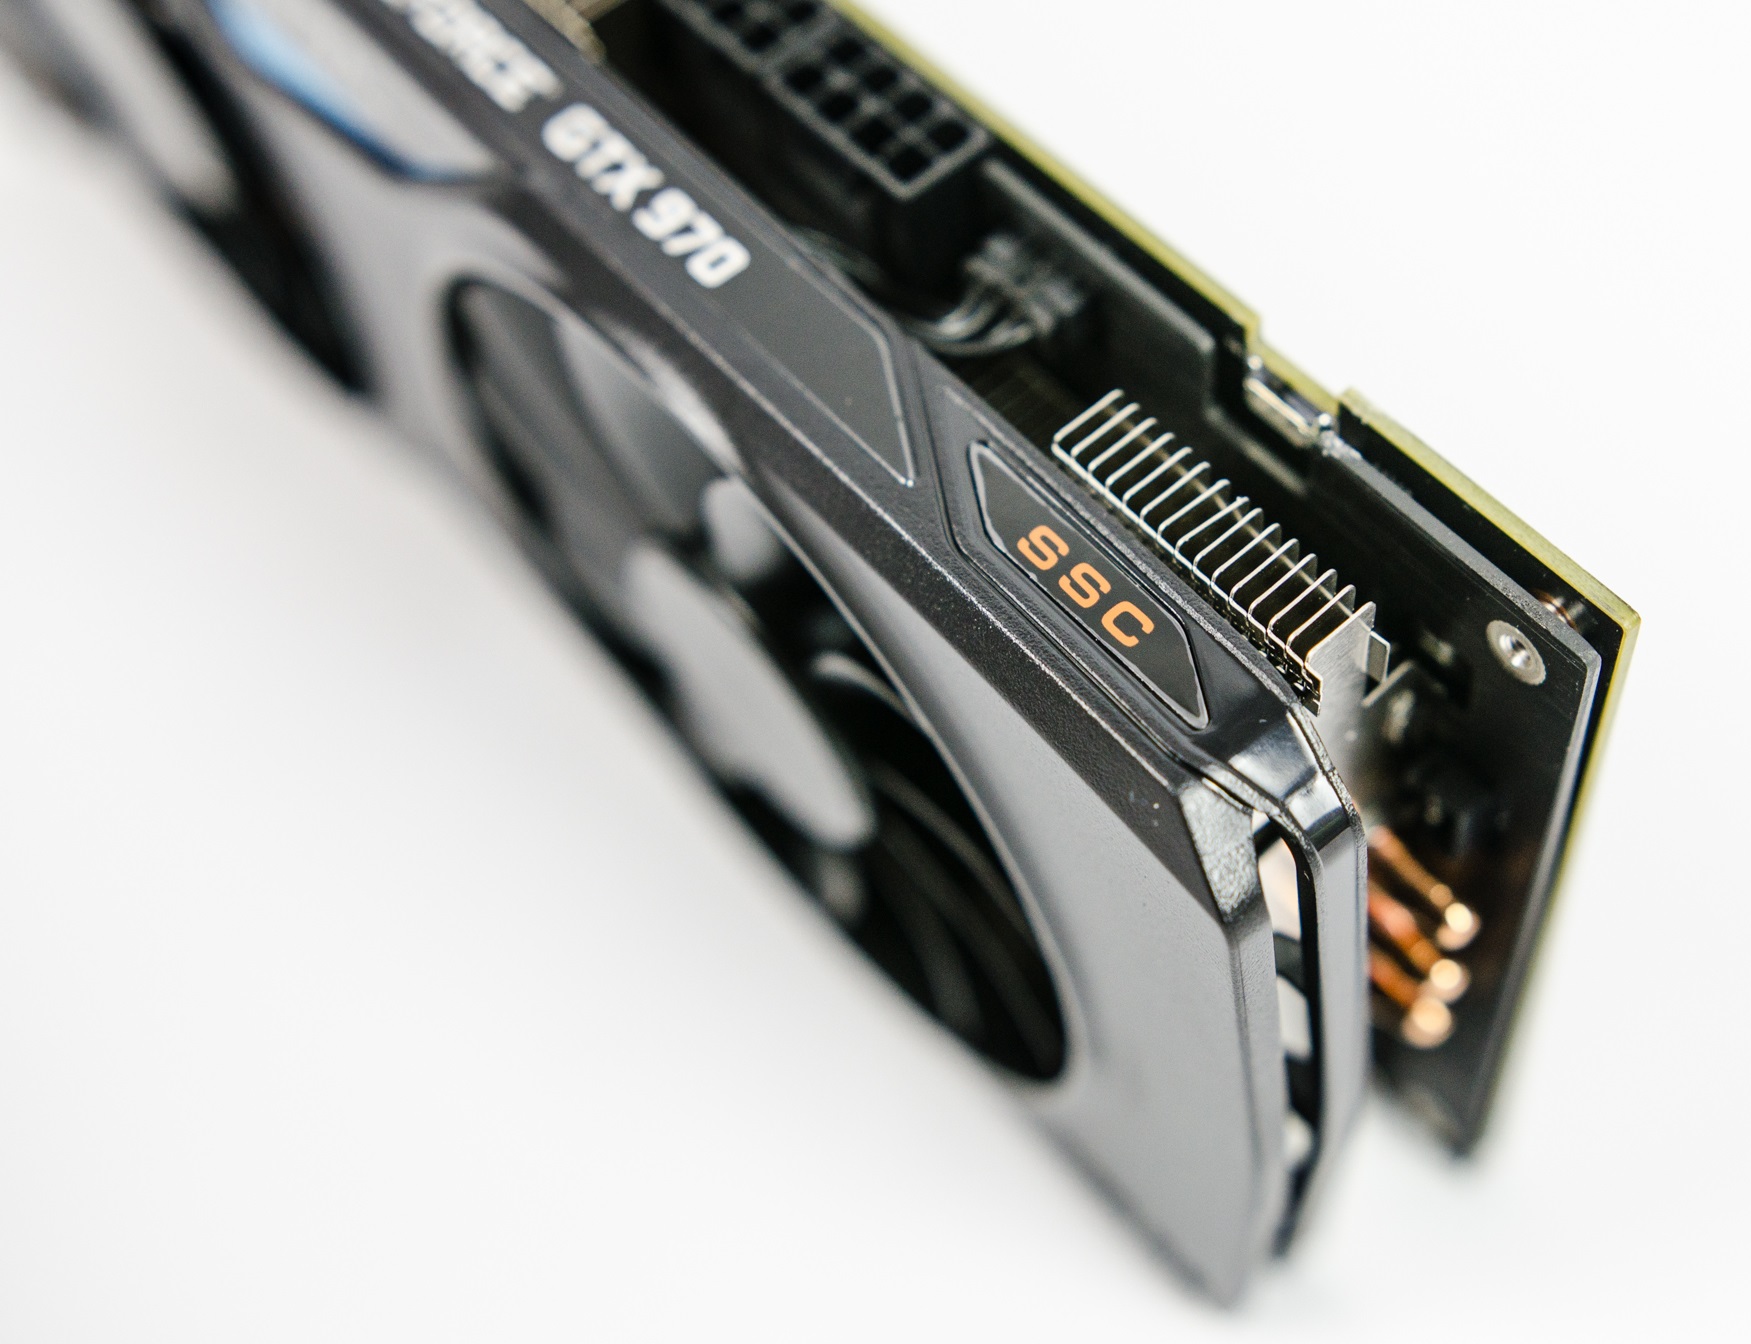 Evga Geforce Gtx 970 Ssc Acx 2 0 Review Extremerigs Net